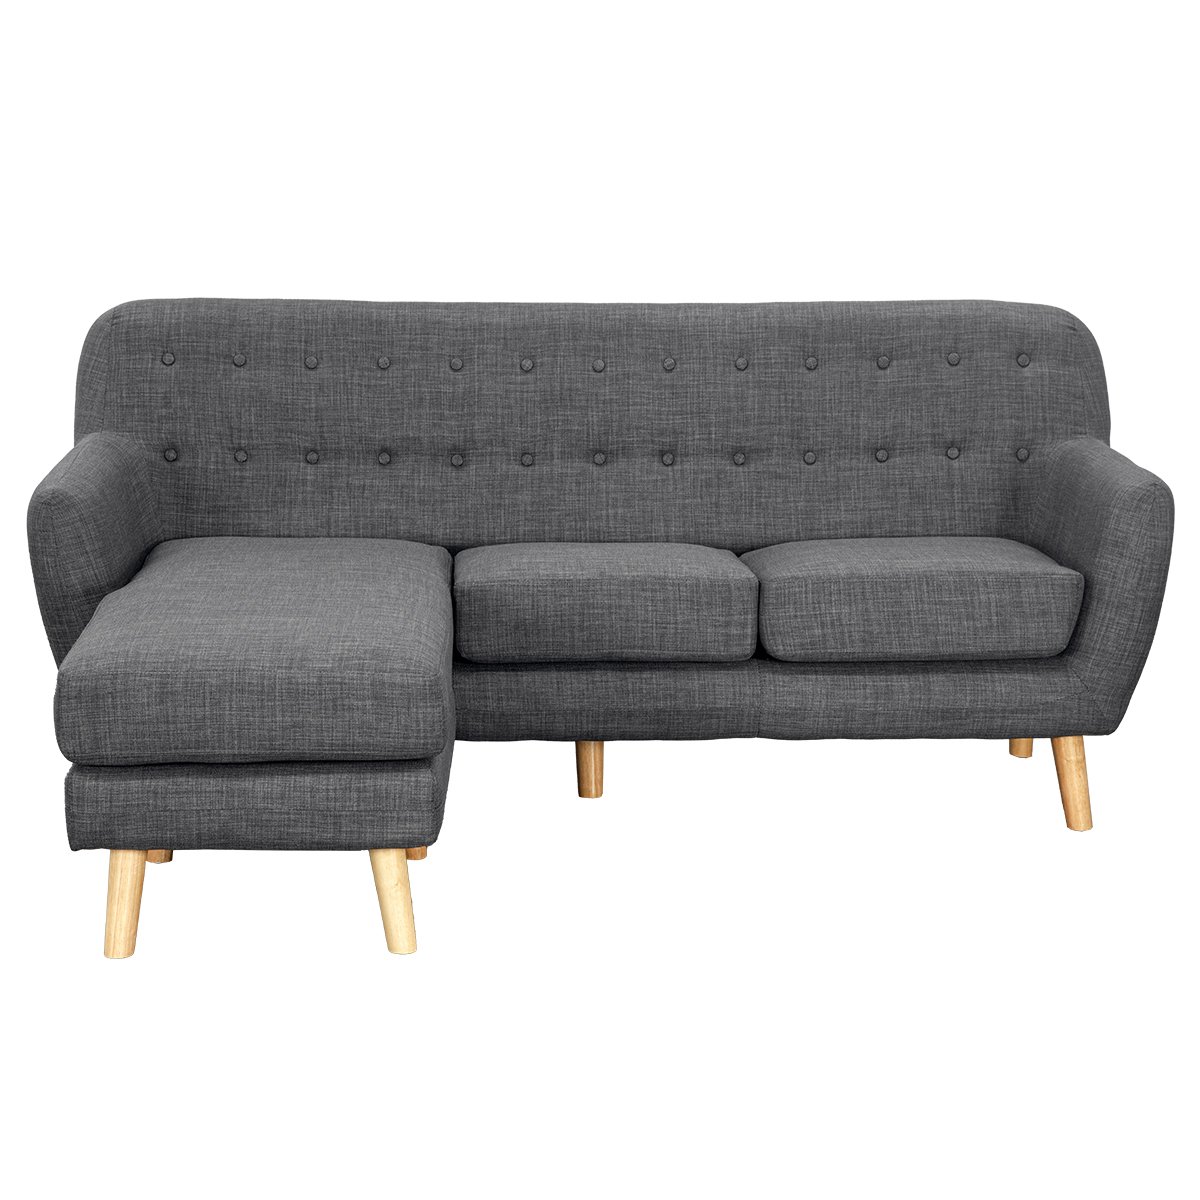 Linen Corner Wooden Sofa Couch Lounge L-shaped with Chaise - Dark Grey 1